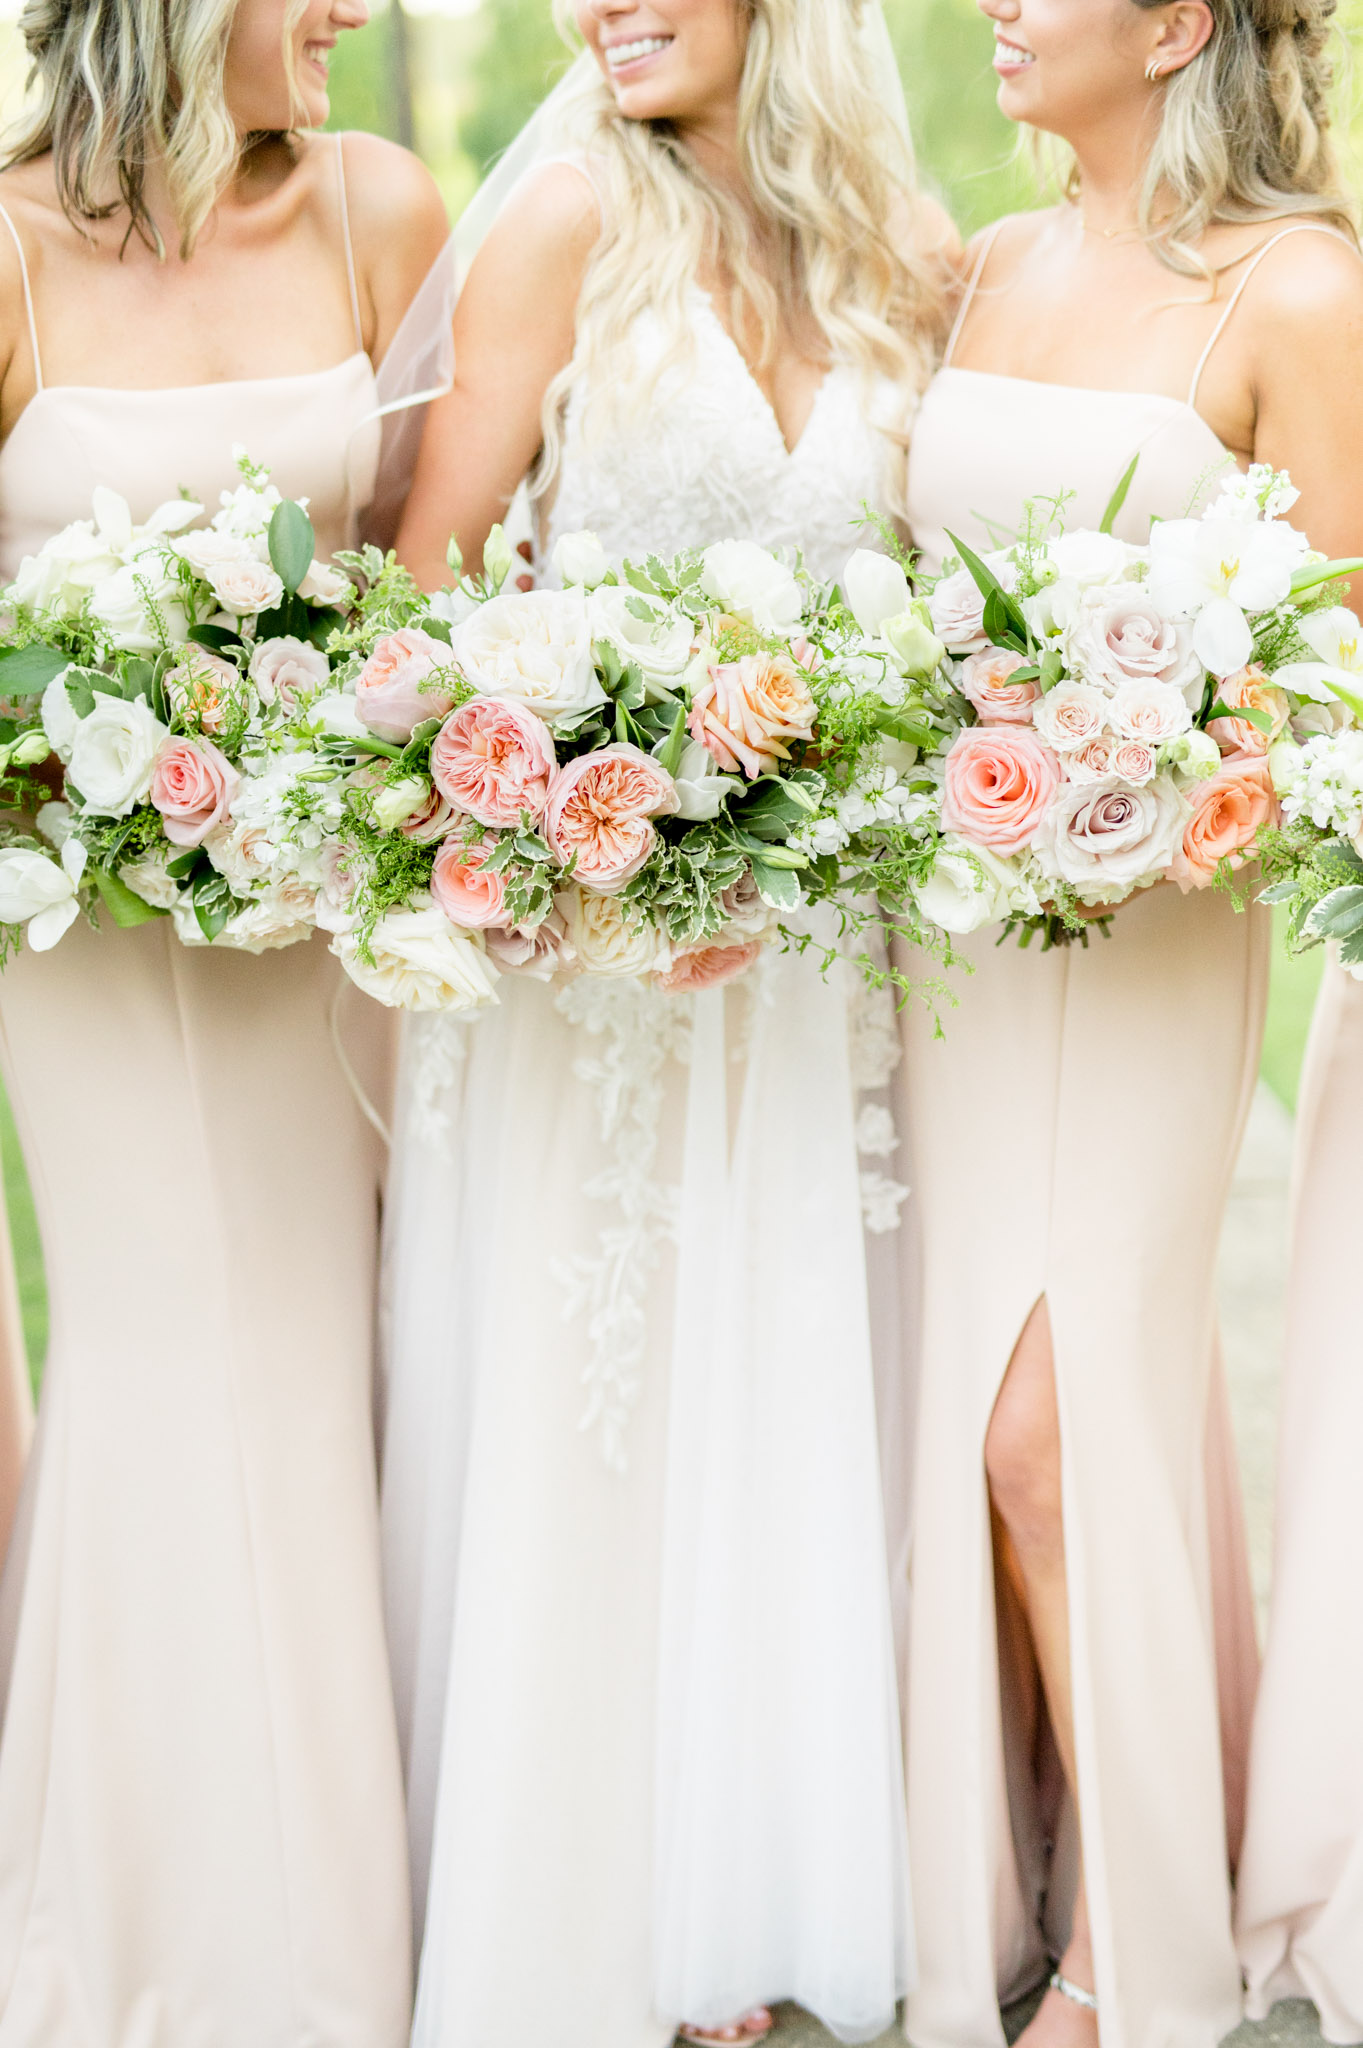 Bride and bridesmaids hold pink and white flowers.